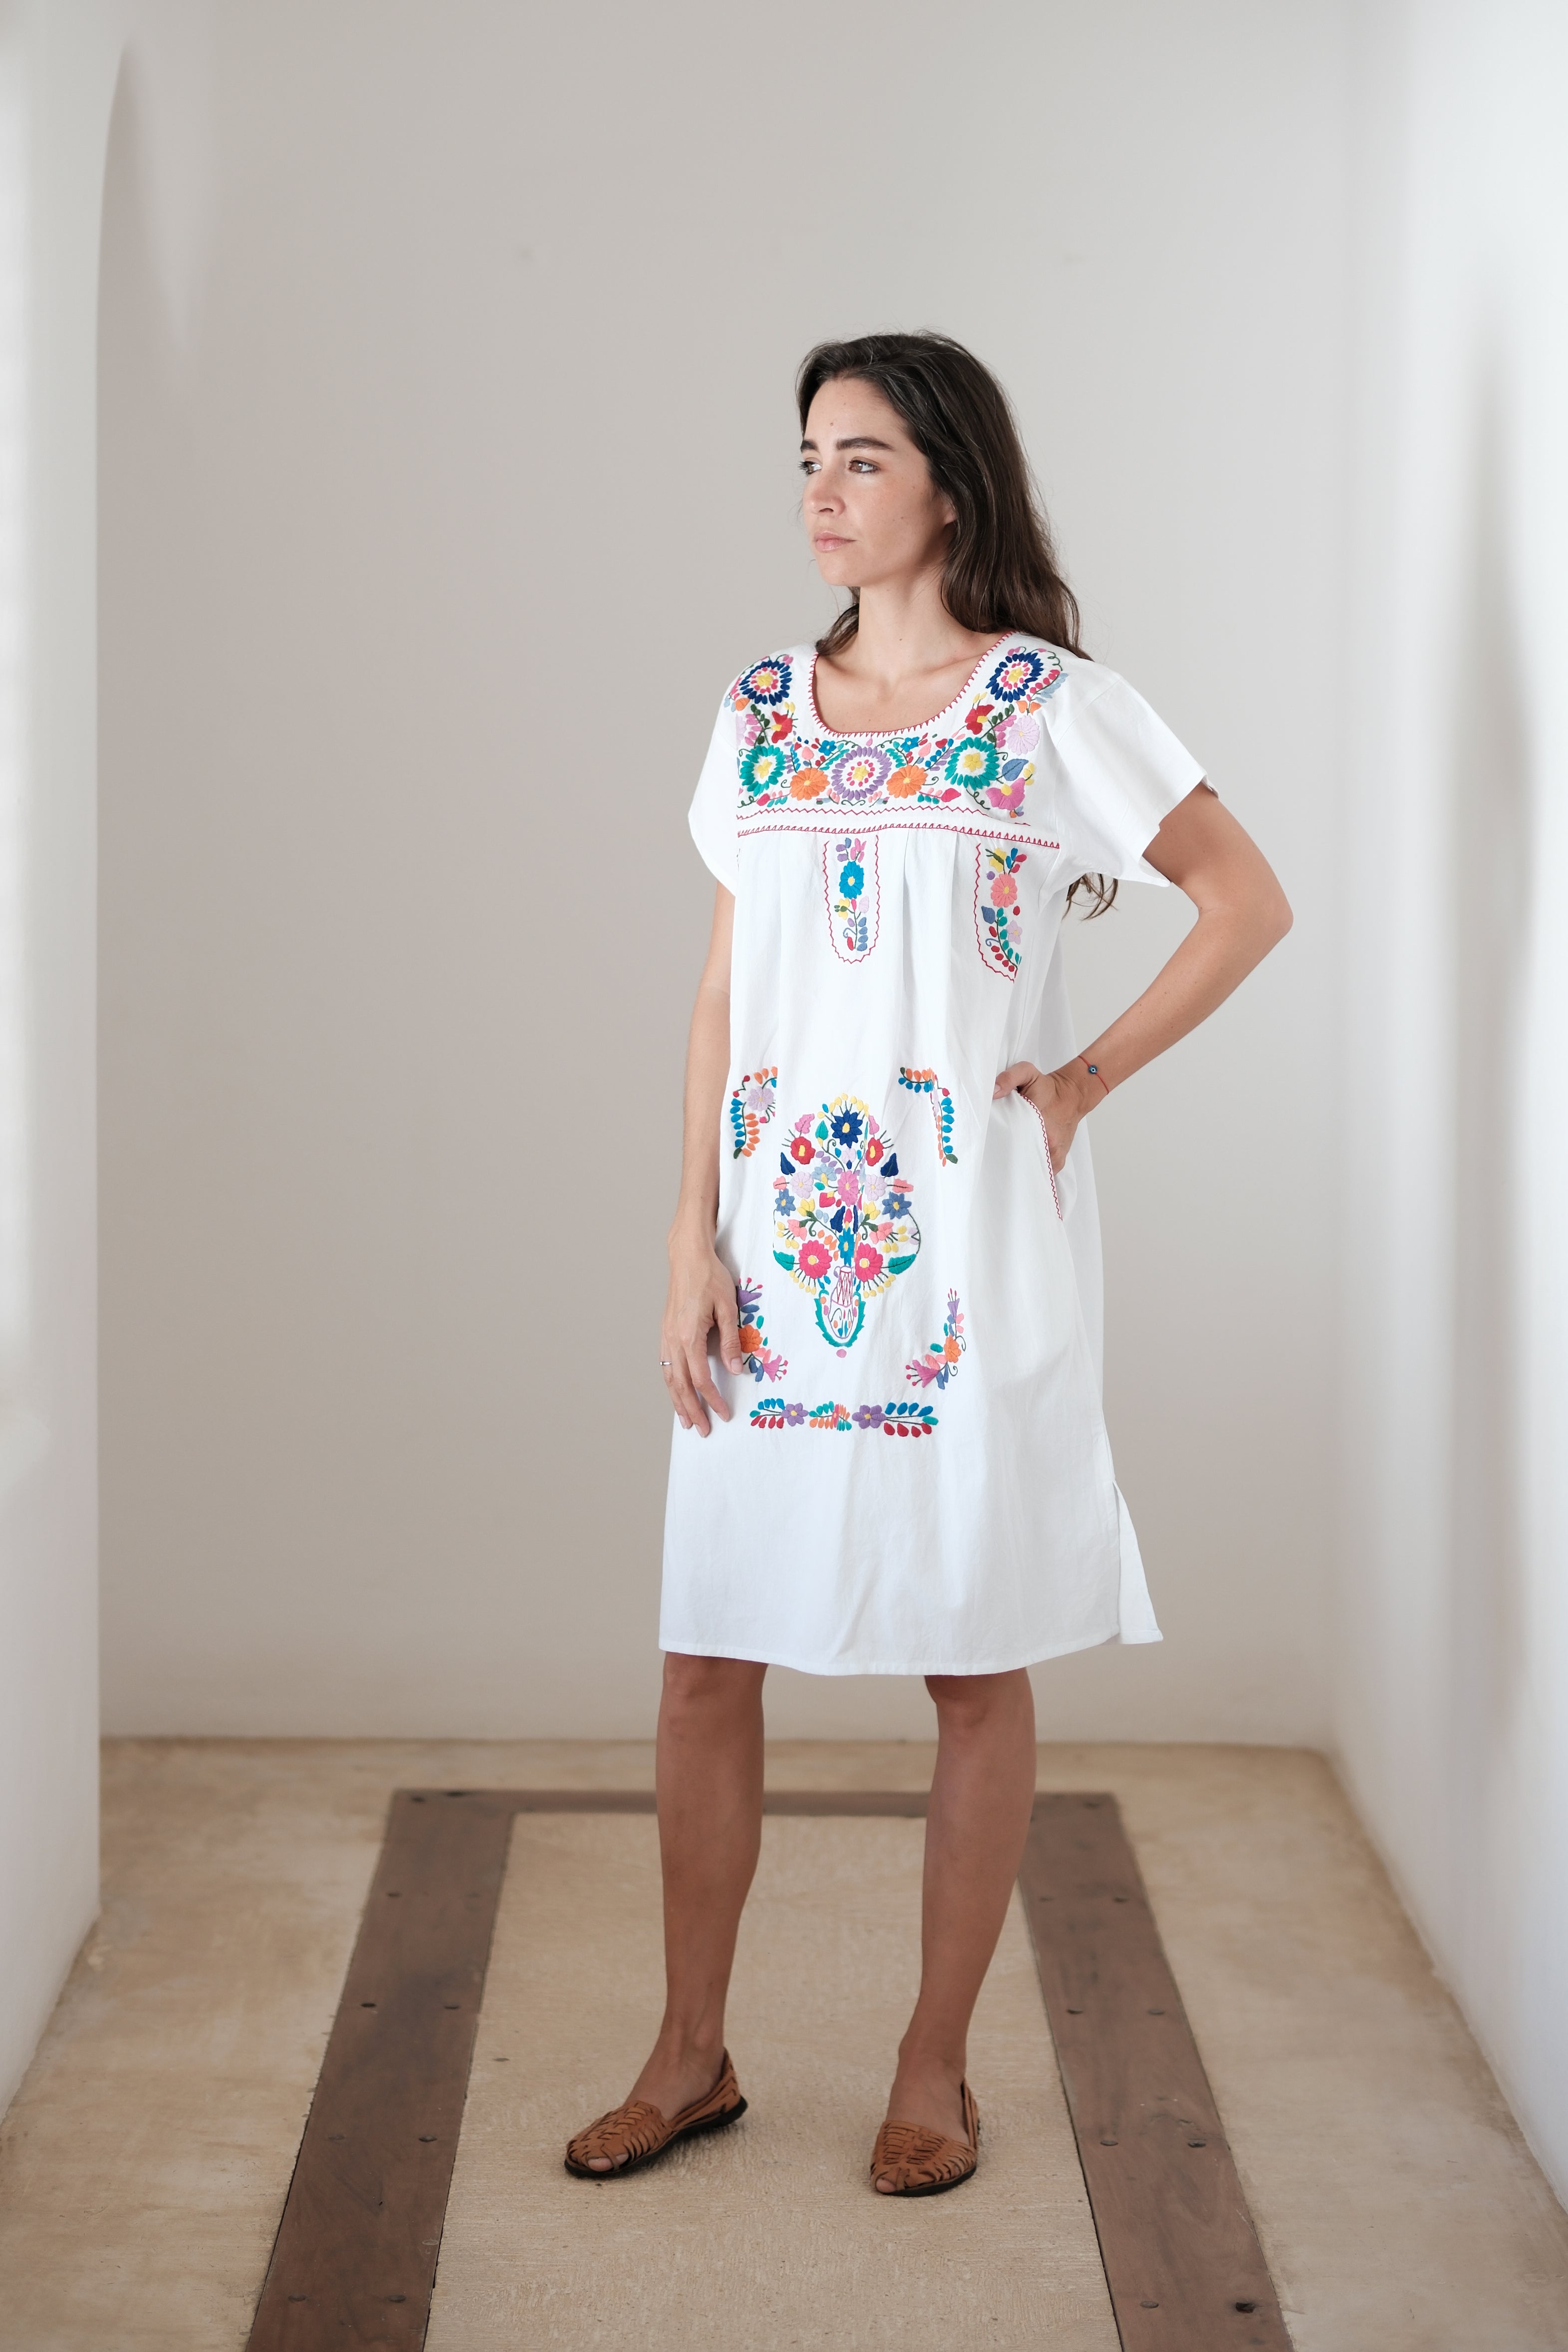 Shop for Traditional Mexican Dresses